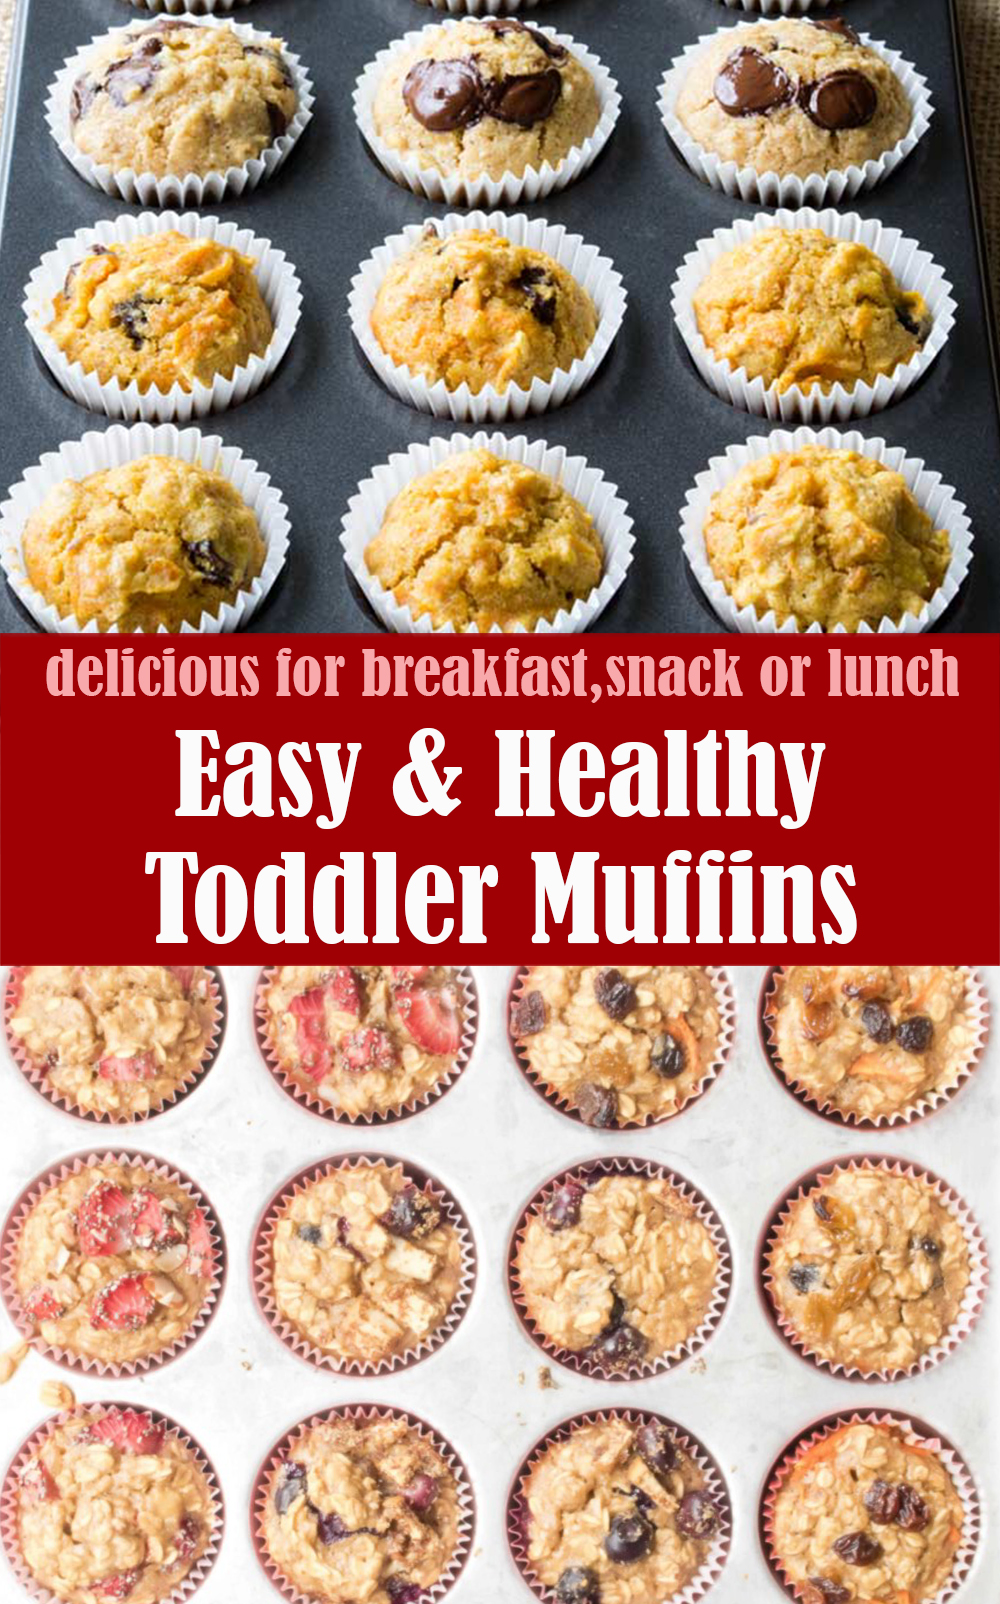 Healthy Toddler Muffins